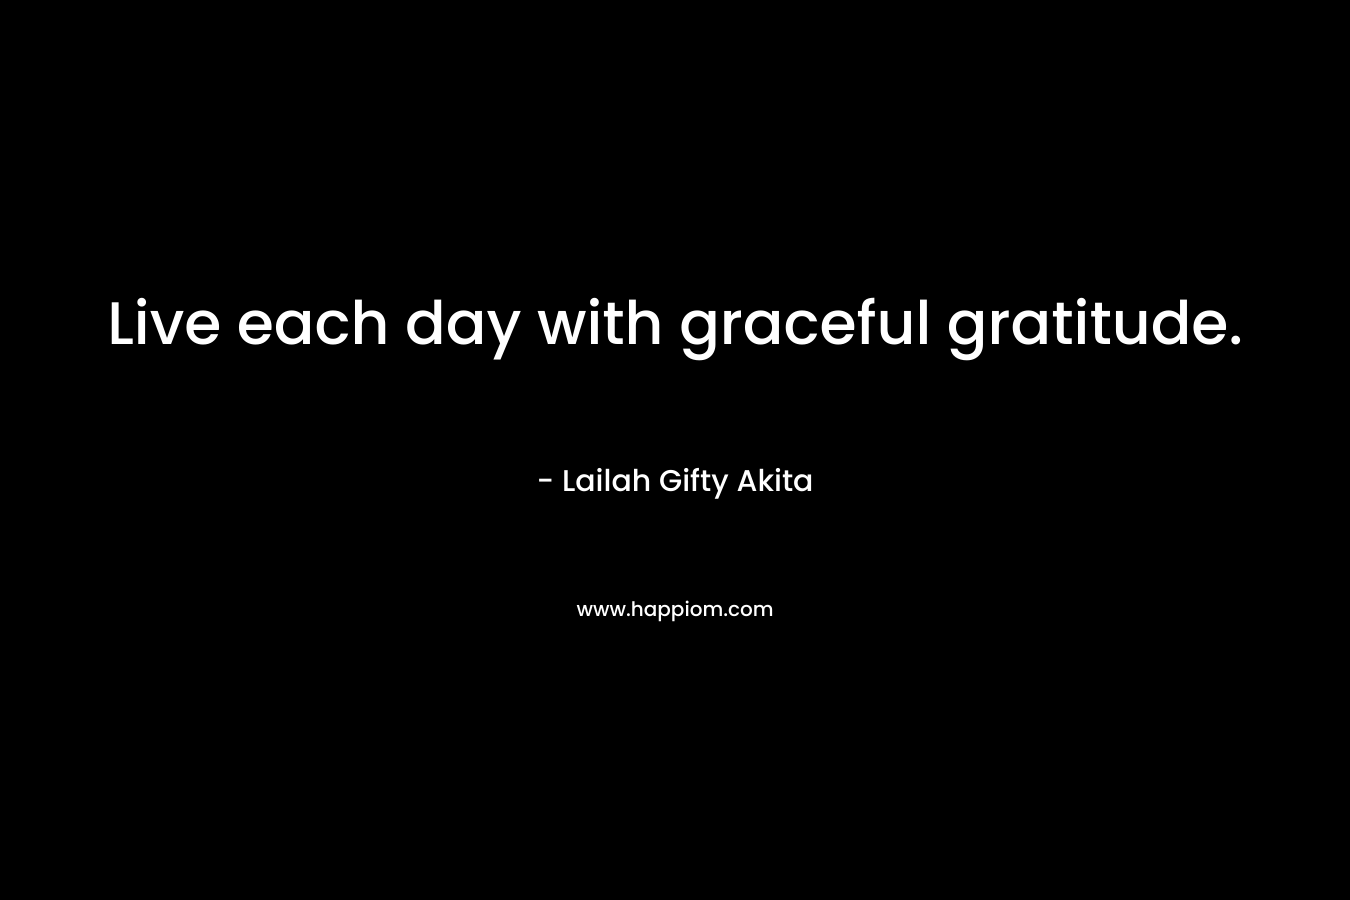 Live each day with graceful gratitude.